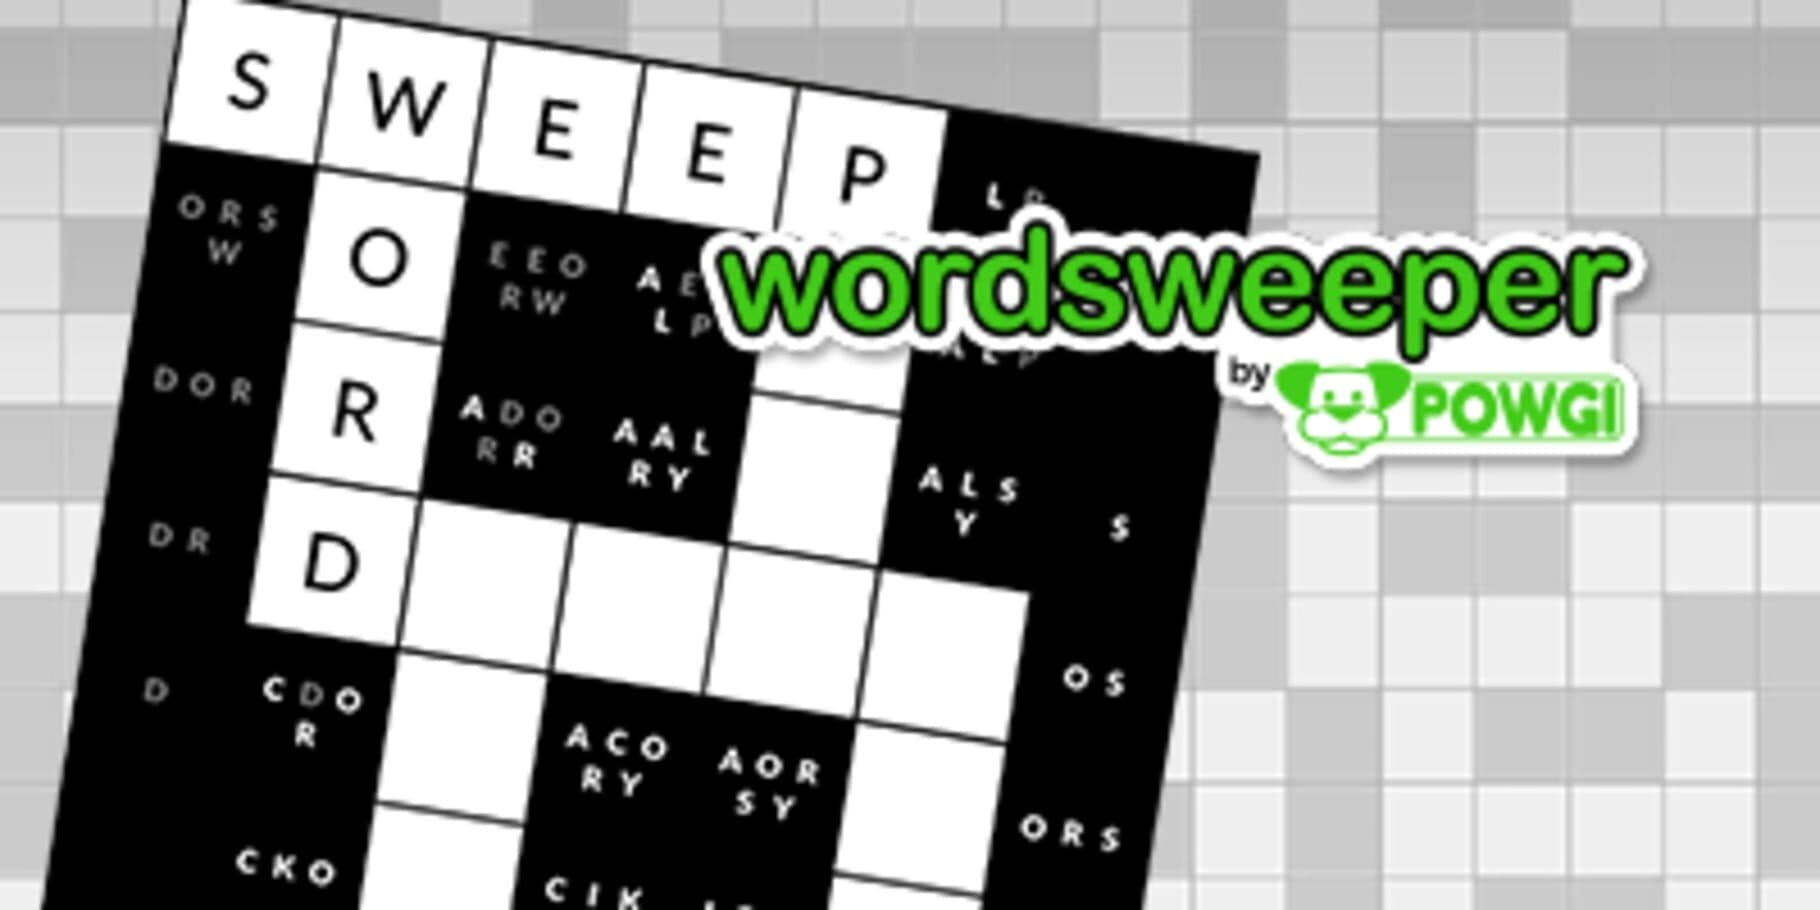 Wordsweeper by Powgi cover art